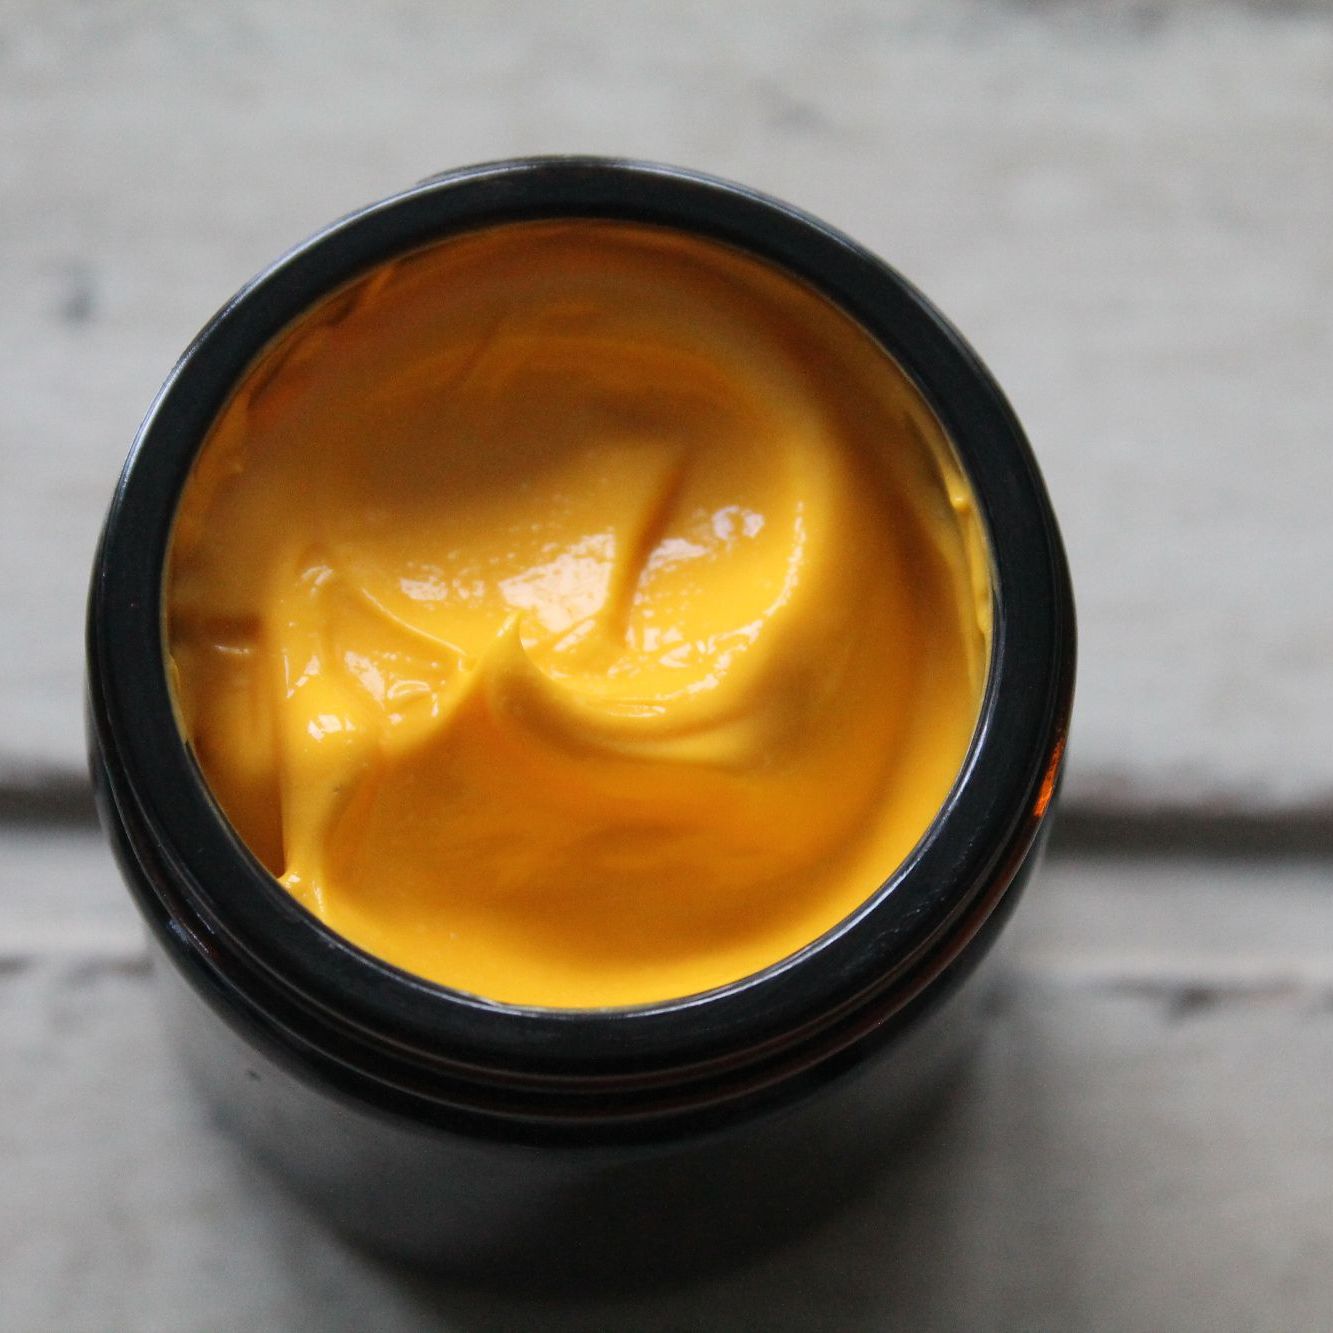 Yellow face cream in amber jar with white background